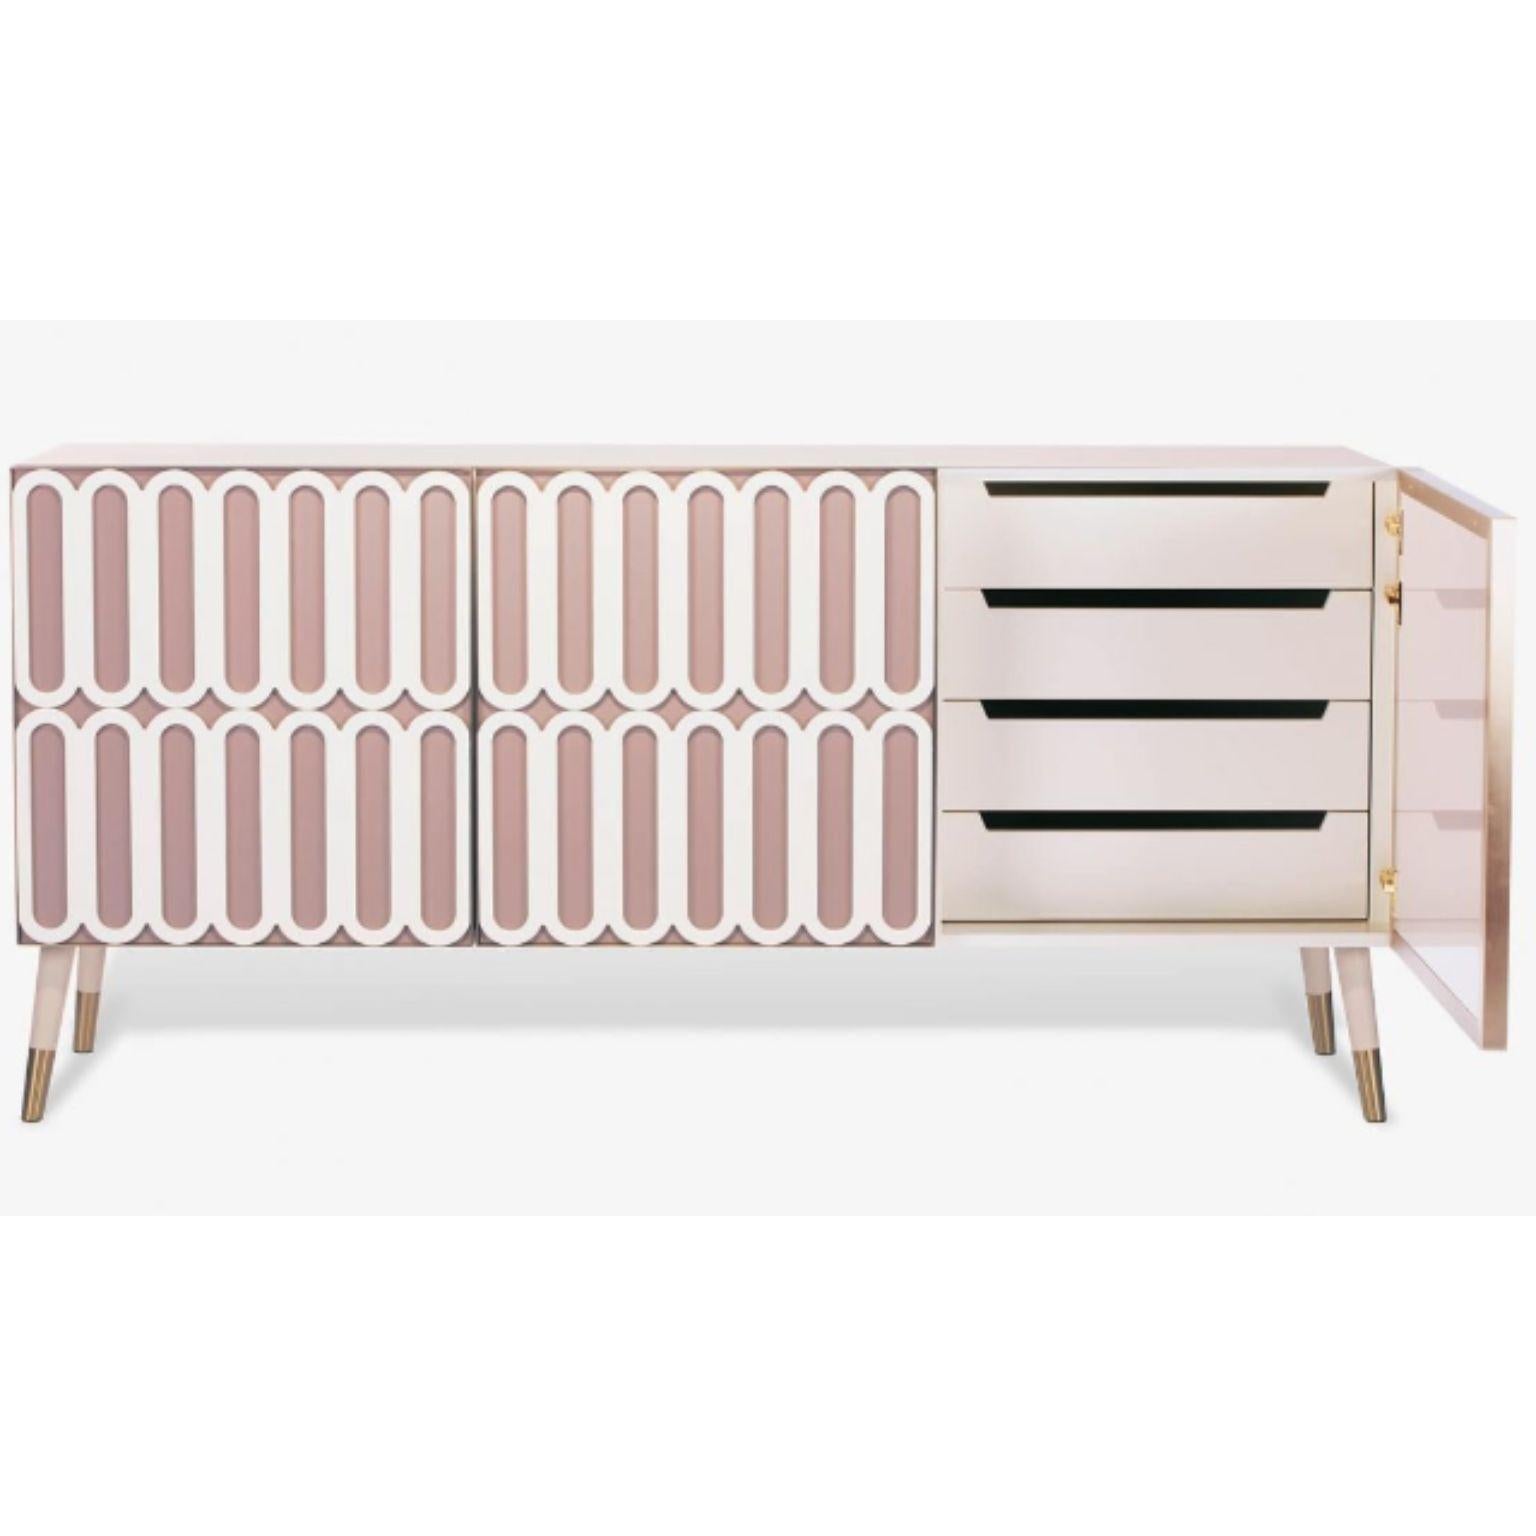 Marshmallow Sideboard by Royal Stranger
Dimensions: W 187.5 x D 48.5 x H 90.5 cm.
Materials: Structure and pattern Pearl lacquered wood with a matte finish.
Doors Nude lacquered wood with a glossy finish.
Door frames and feet covers are brushed